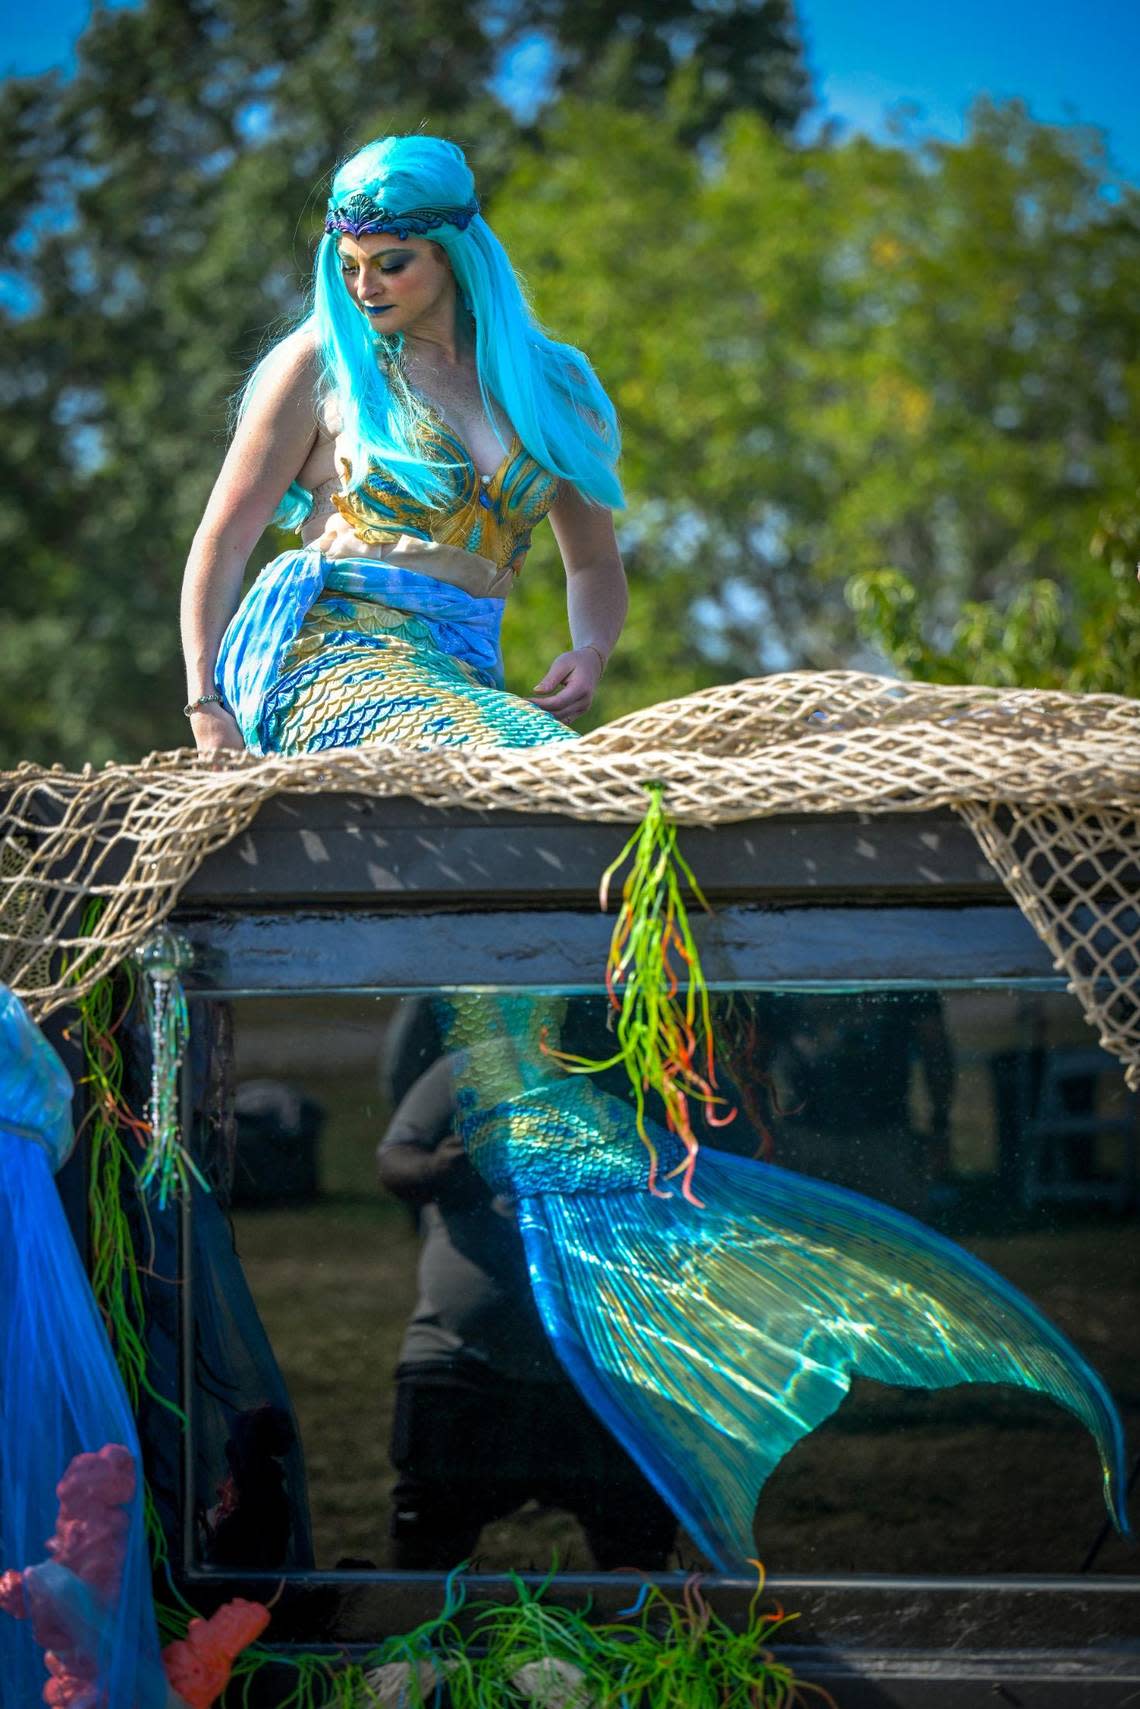 In character as Mermaid Bonnie, Valery Magner gets positioned atop the mermaid tank before the promotional video shoot.